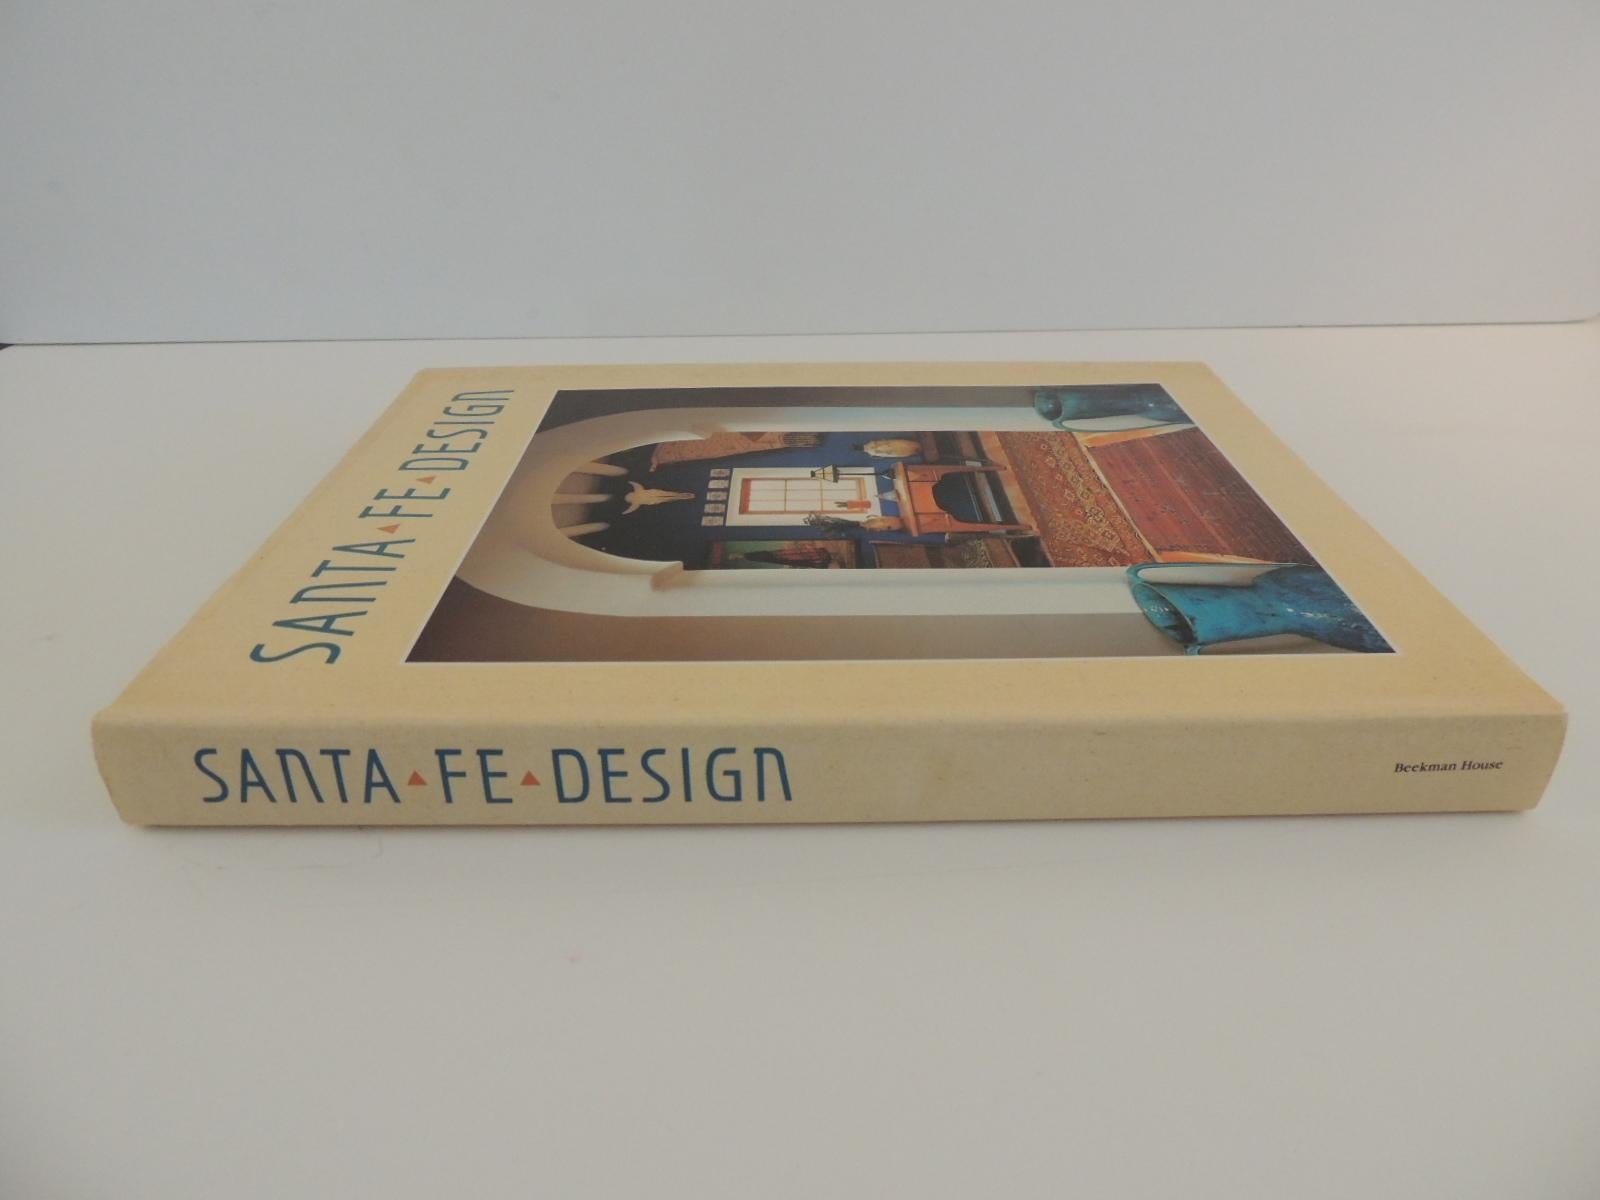 Southwest architecture and design. Interior decor, pottery, painting, motifs.
256 pages.